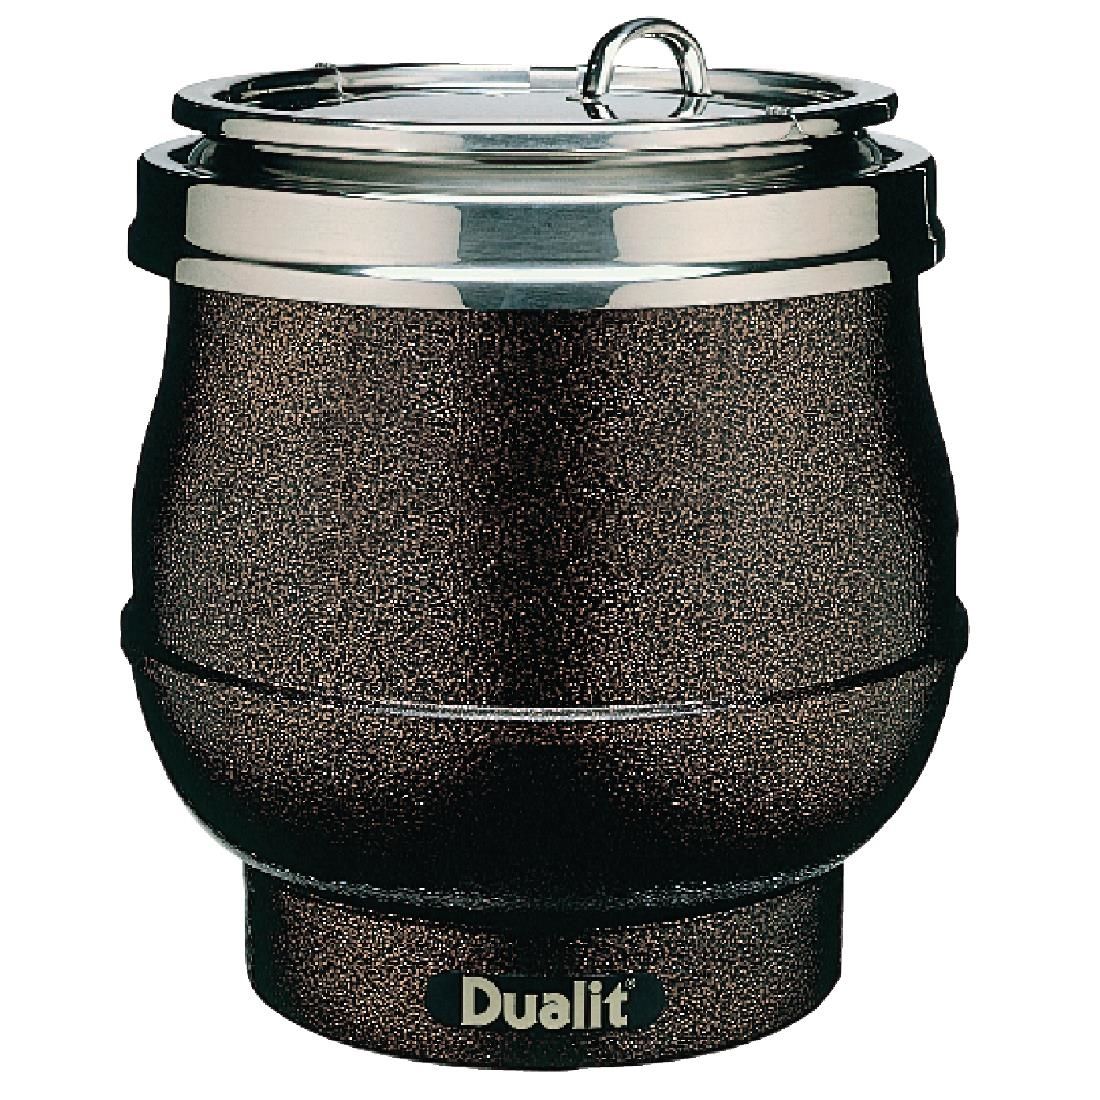 Dualit Hotpot Soup Kettle Rustic Brown 70007 JD Catering Equipment Solutions Ltd